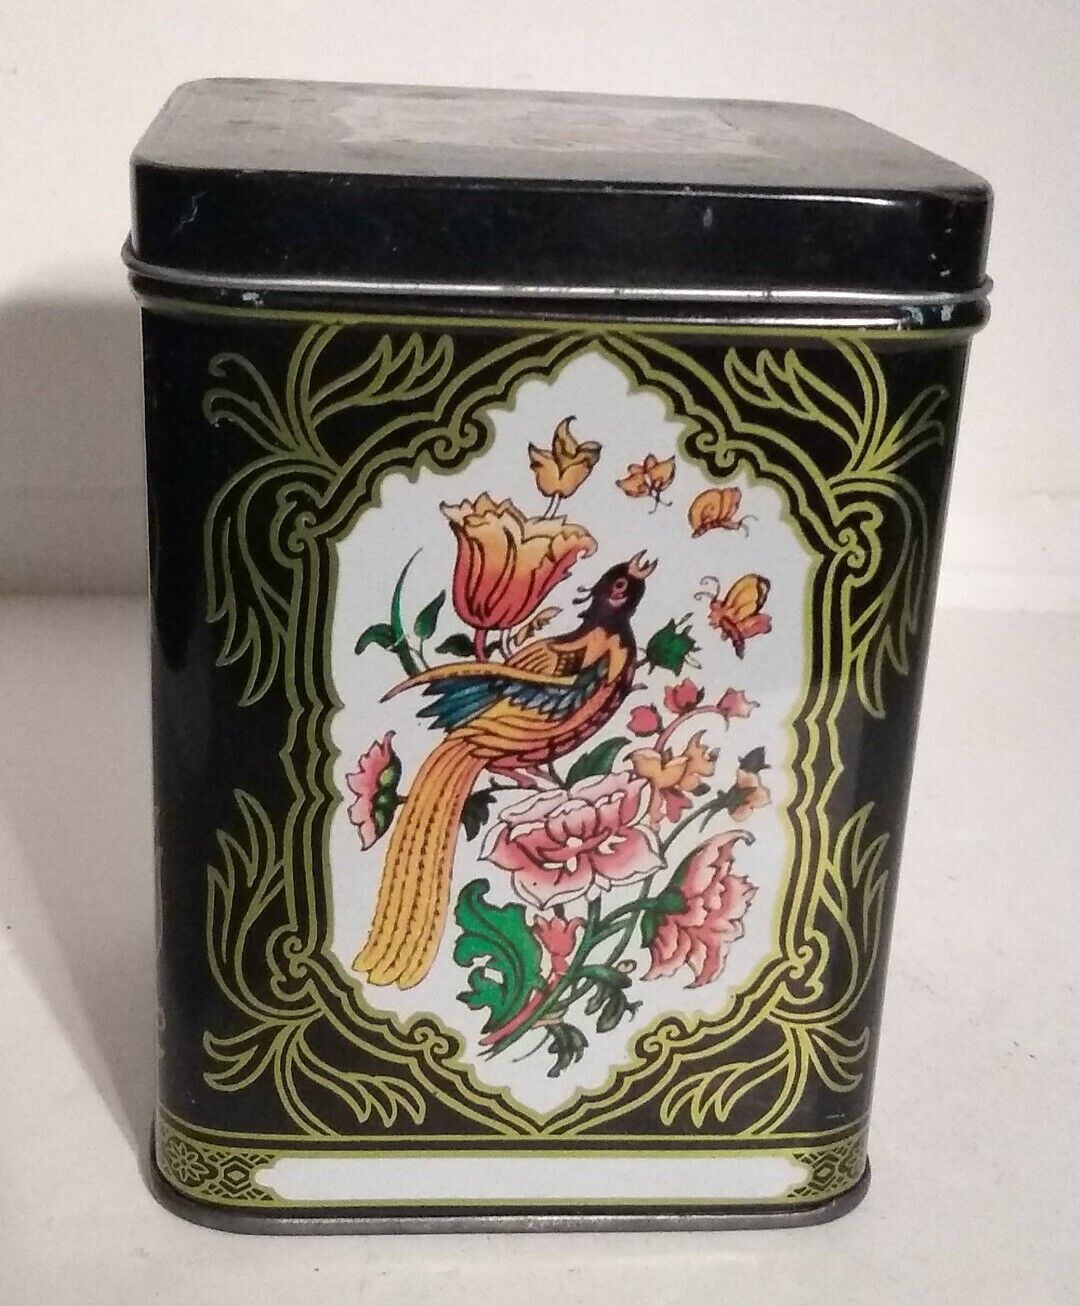 Vintage Metal Tin Container Black Floral & Birds Pretty 4.75" tall 3.25" square